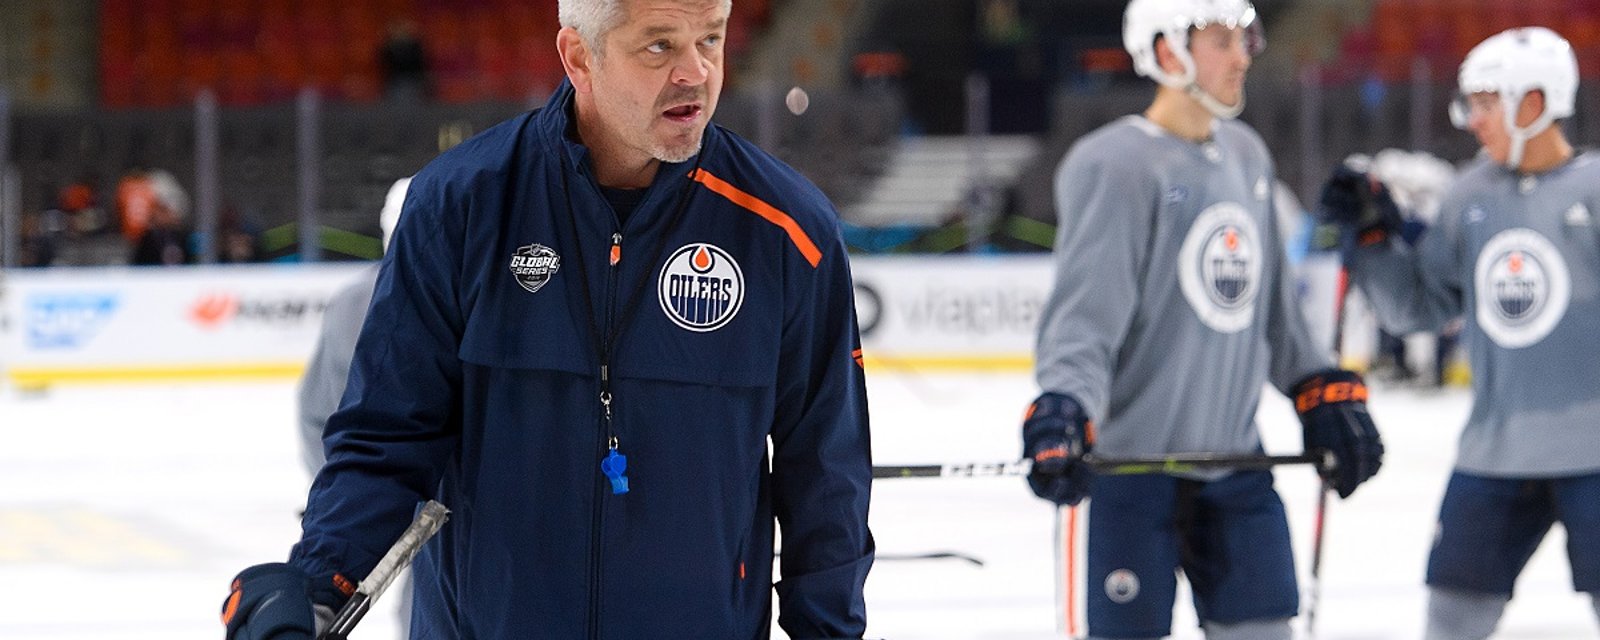 Two insiders linked former Oilers coach Todd McLellan to a new NHL team.